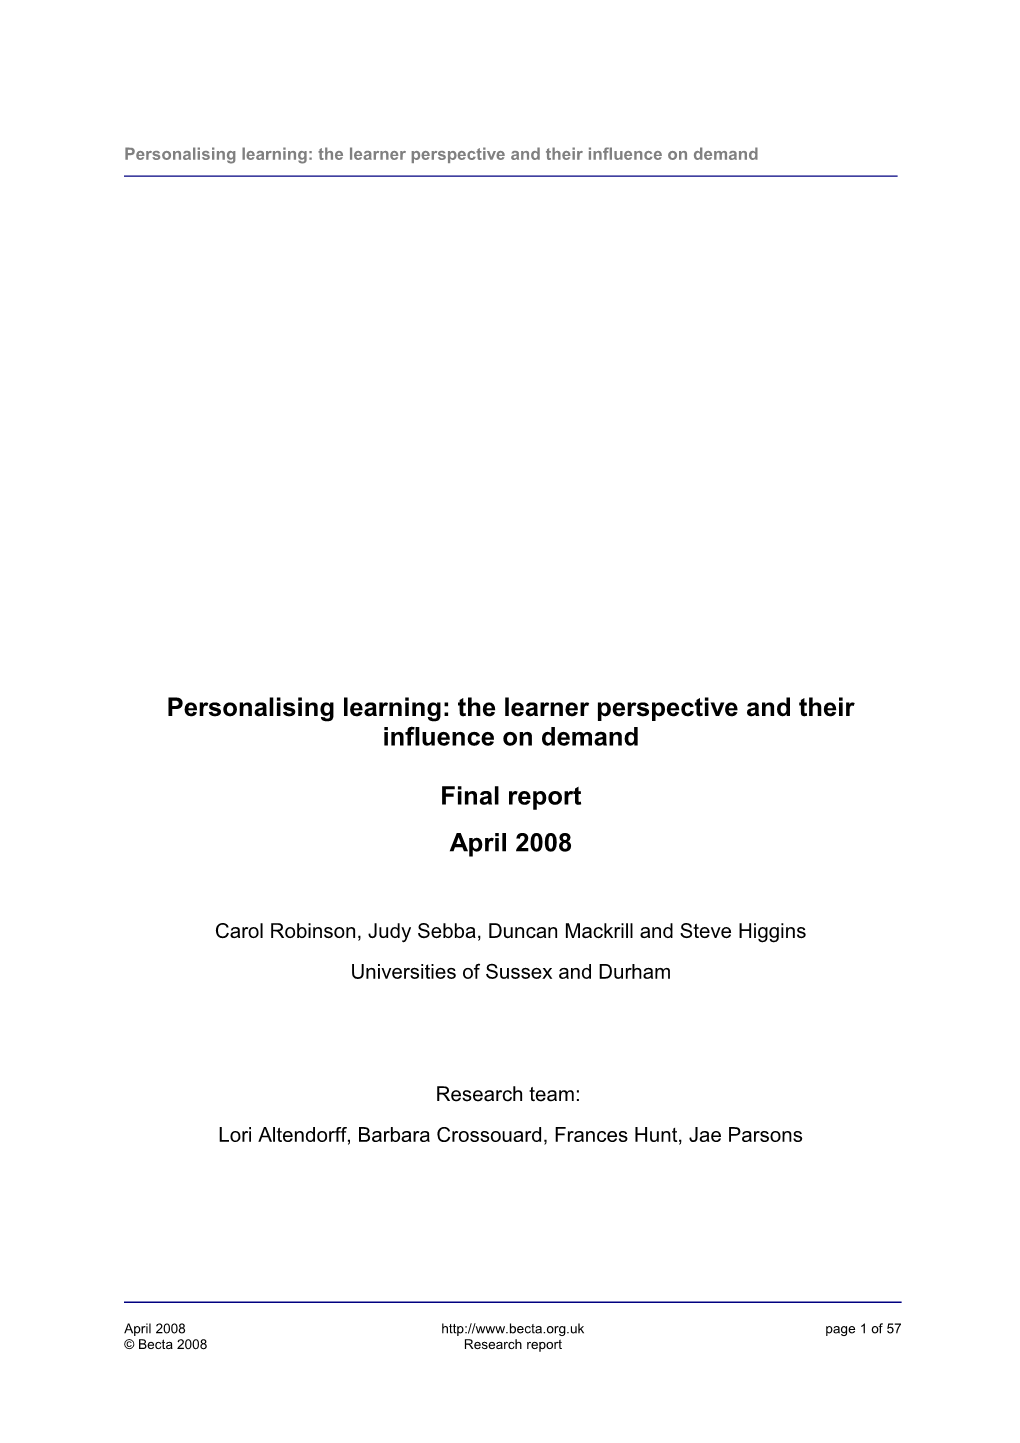 Personalising Learning: the Learner Perspective and Their Influence on Demand